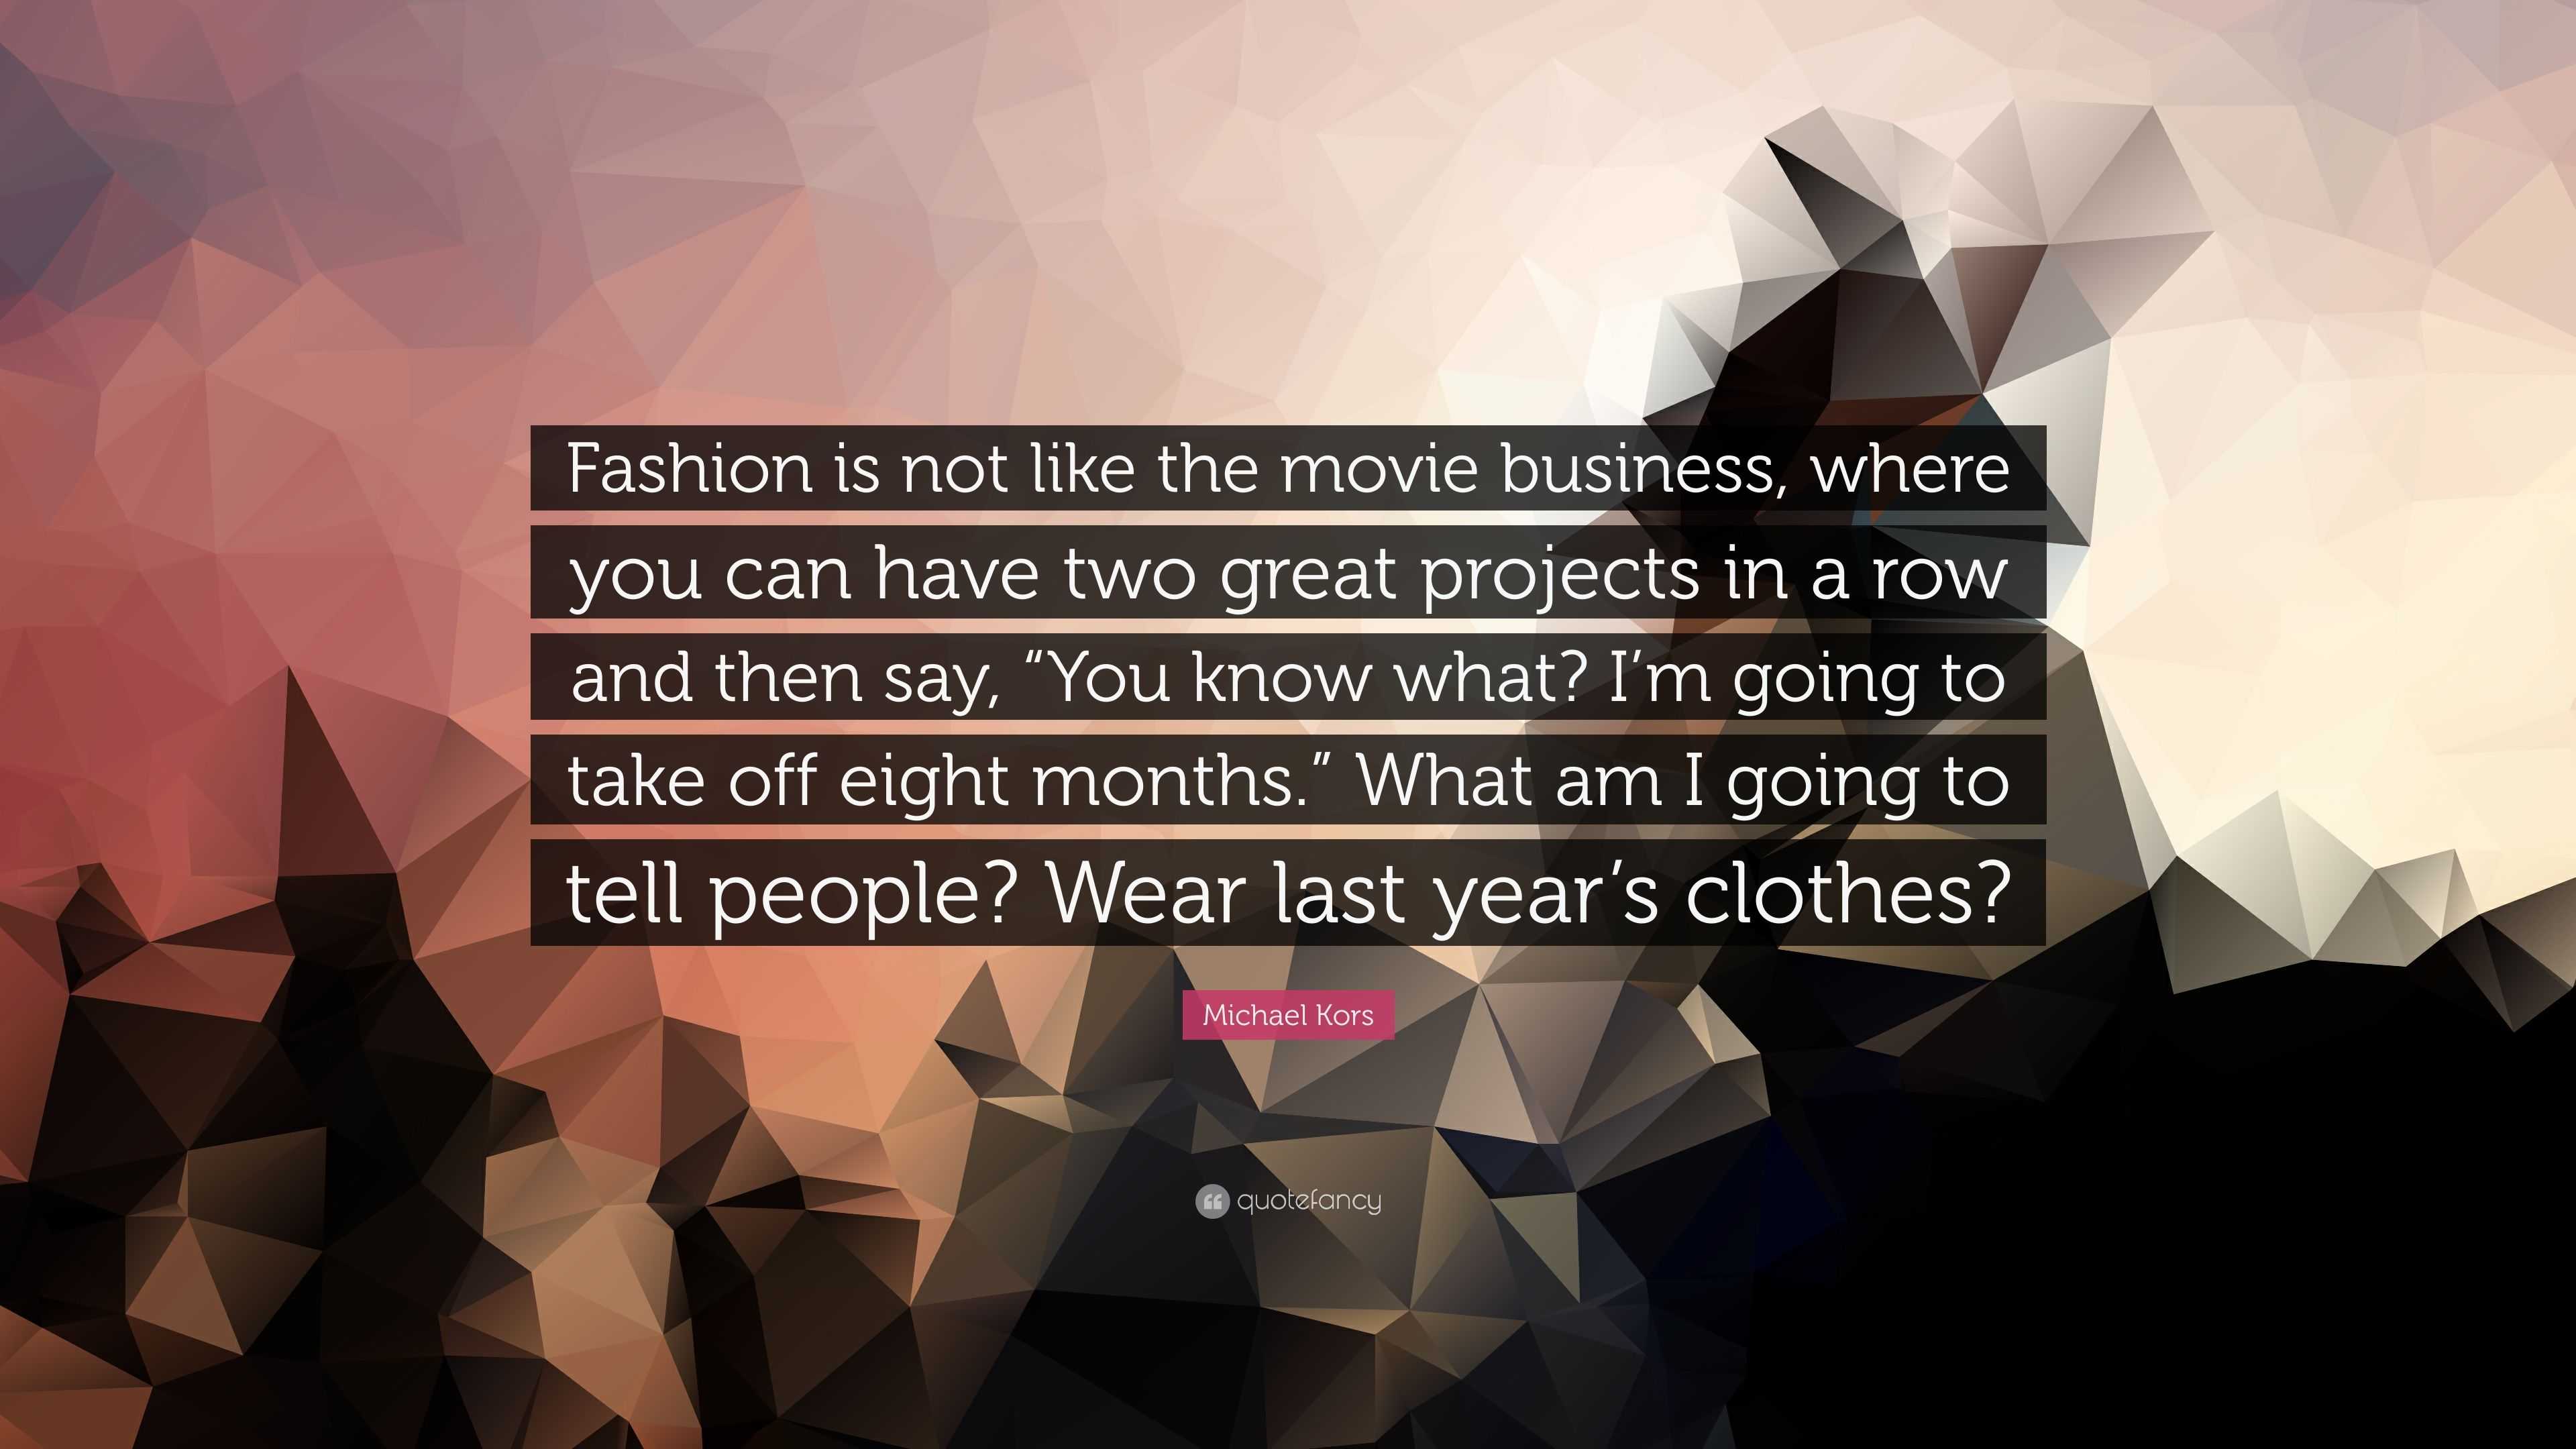 Michael Kors Quote: “Fashion is not like the movie business, where you can  have two great projects in a row and then say, “You know what? I'm...”